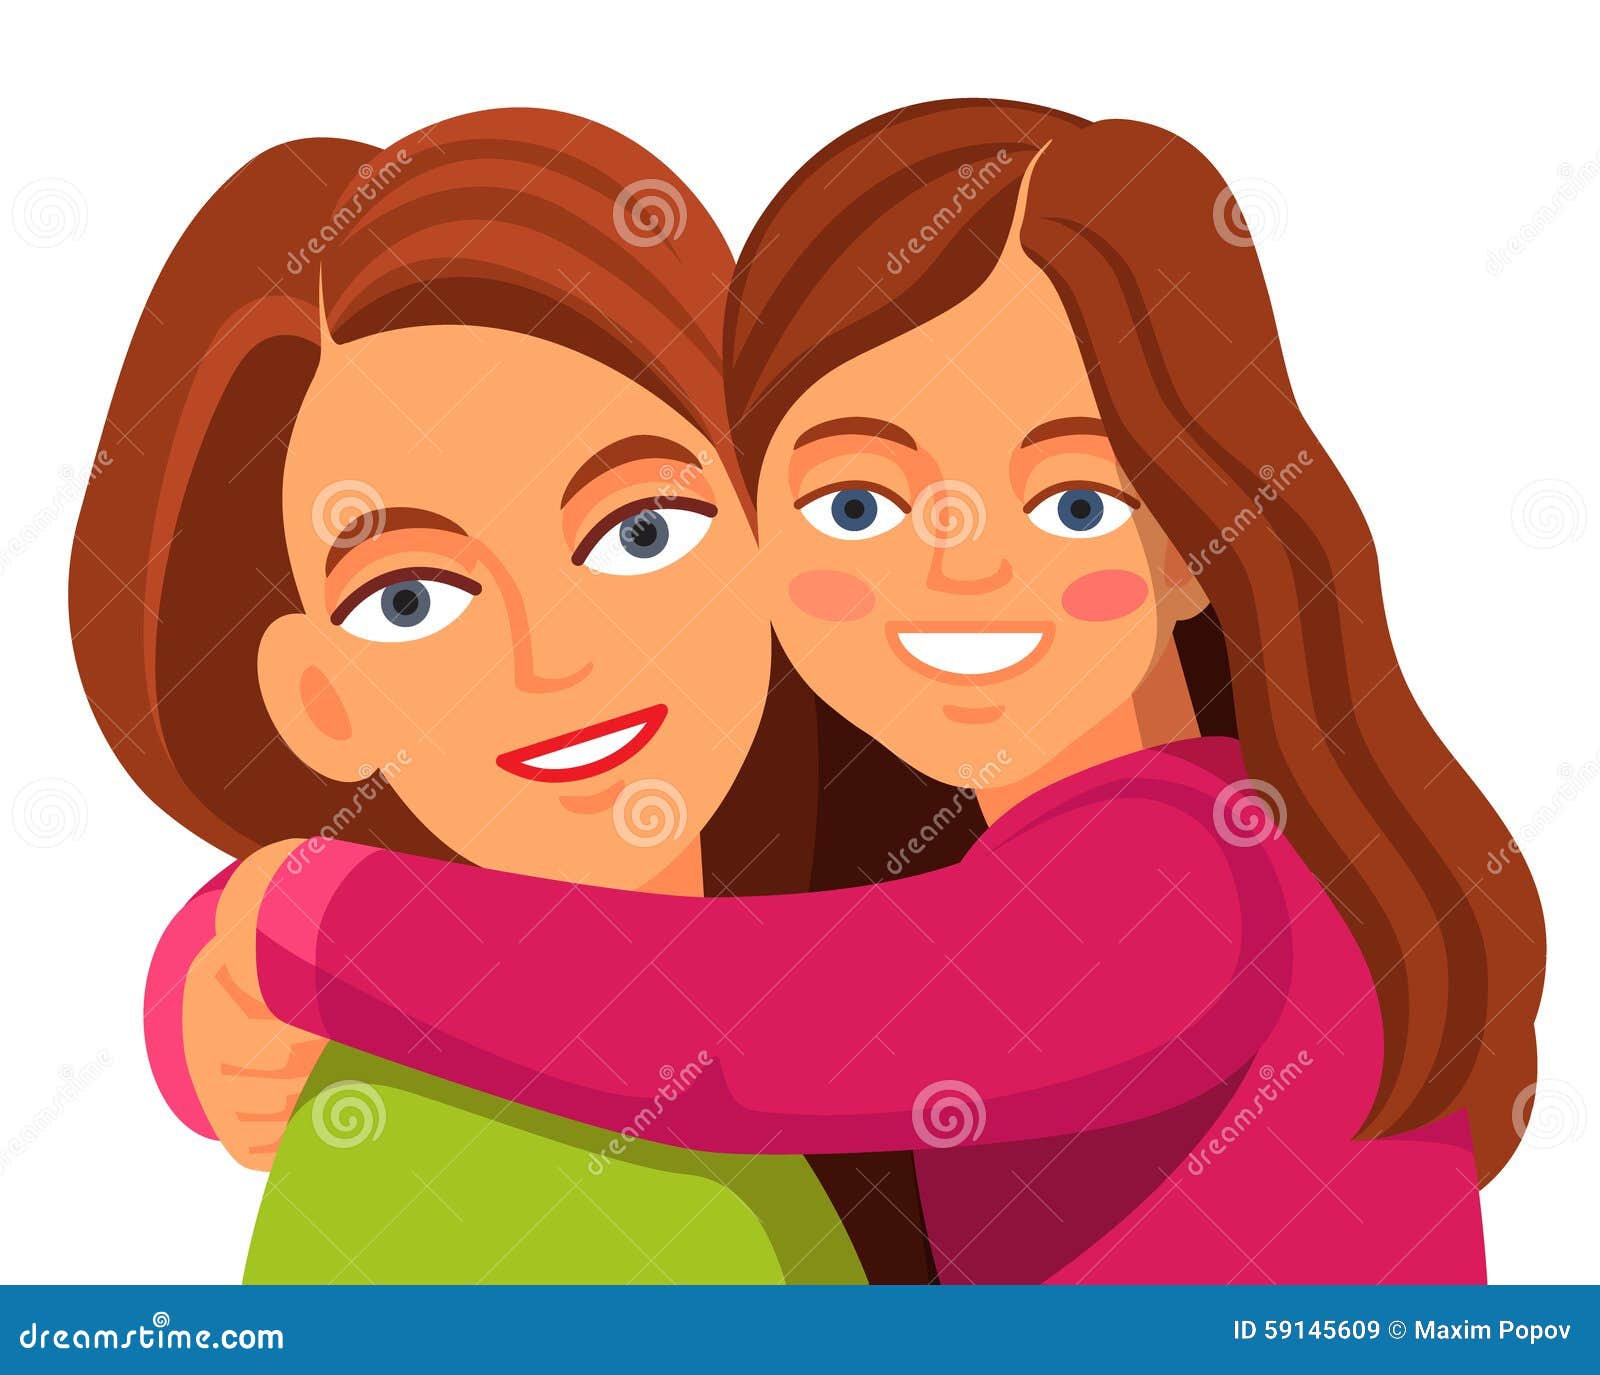 mother's love clipart - photo #33